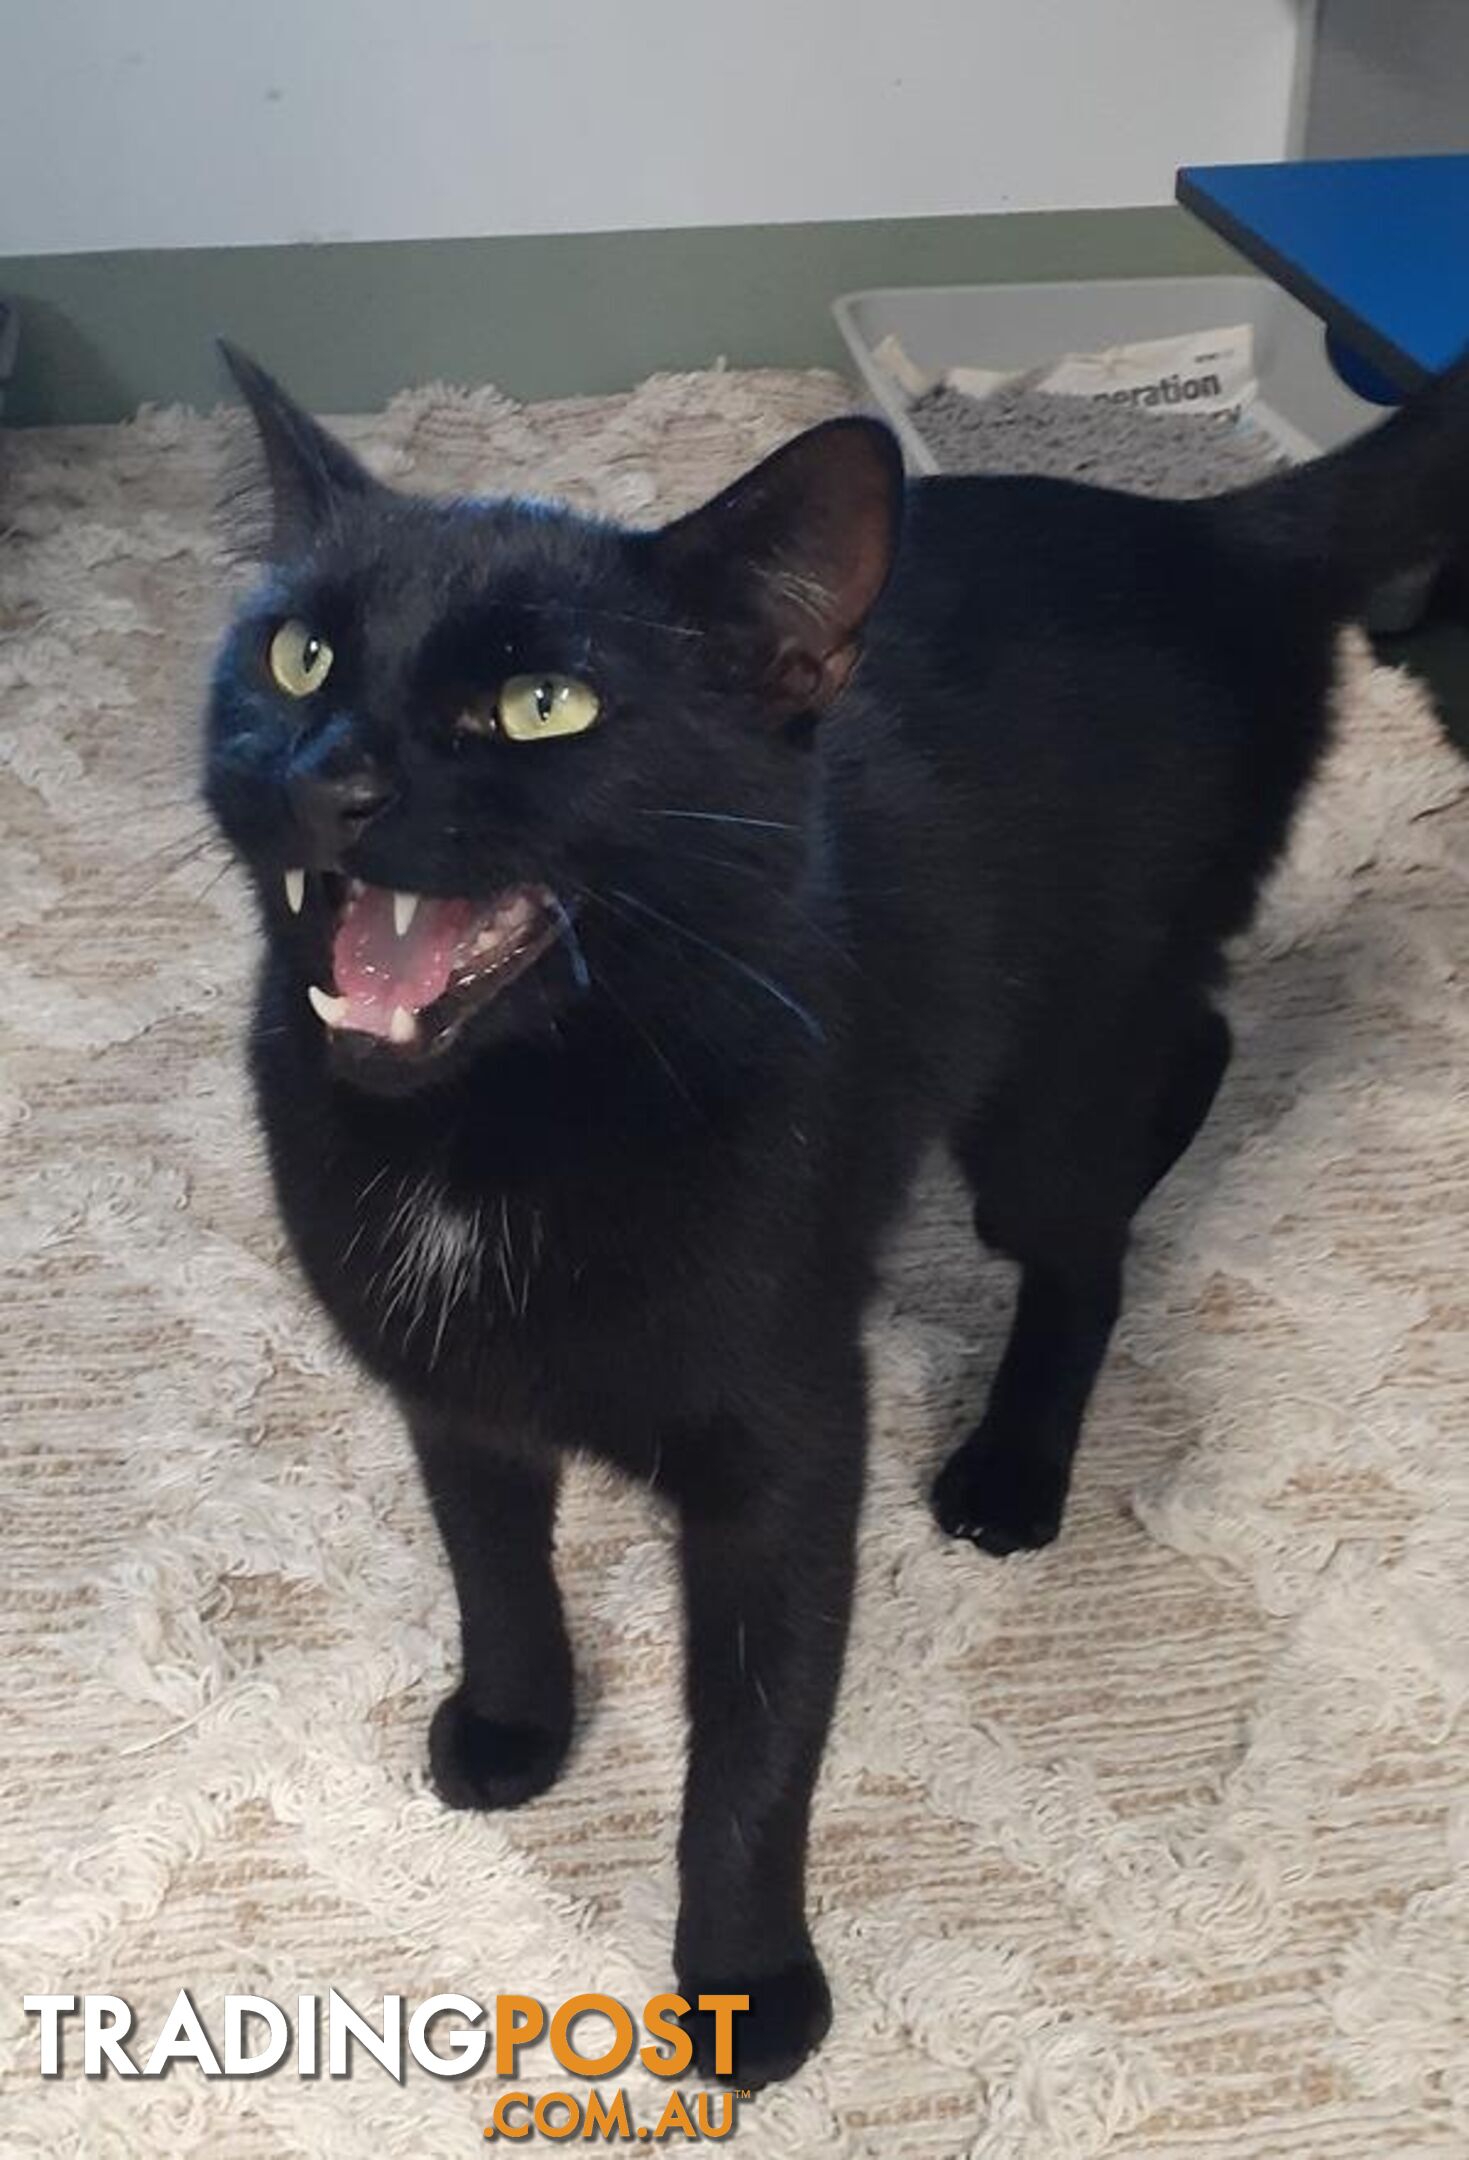 Chad - Domestic Short Hair, 2 Years 6 Months 2 Weeks (approx)